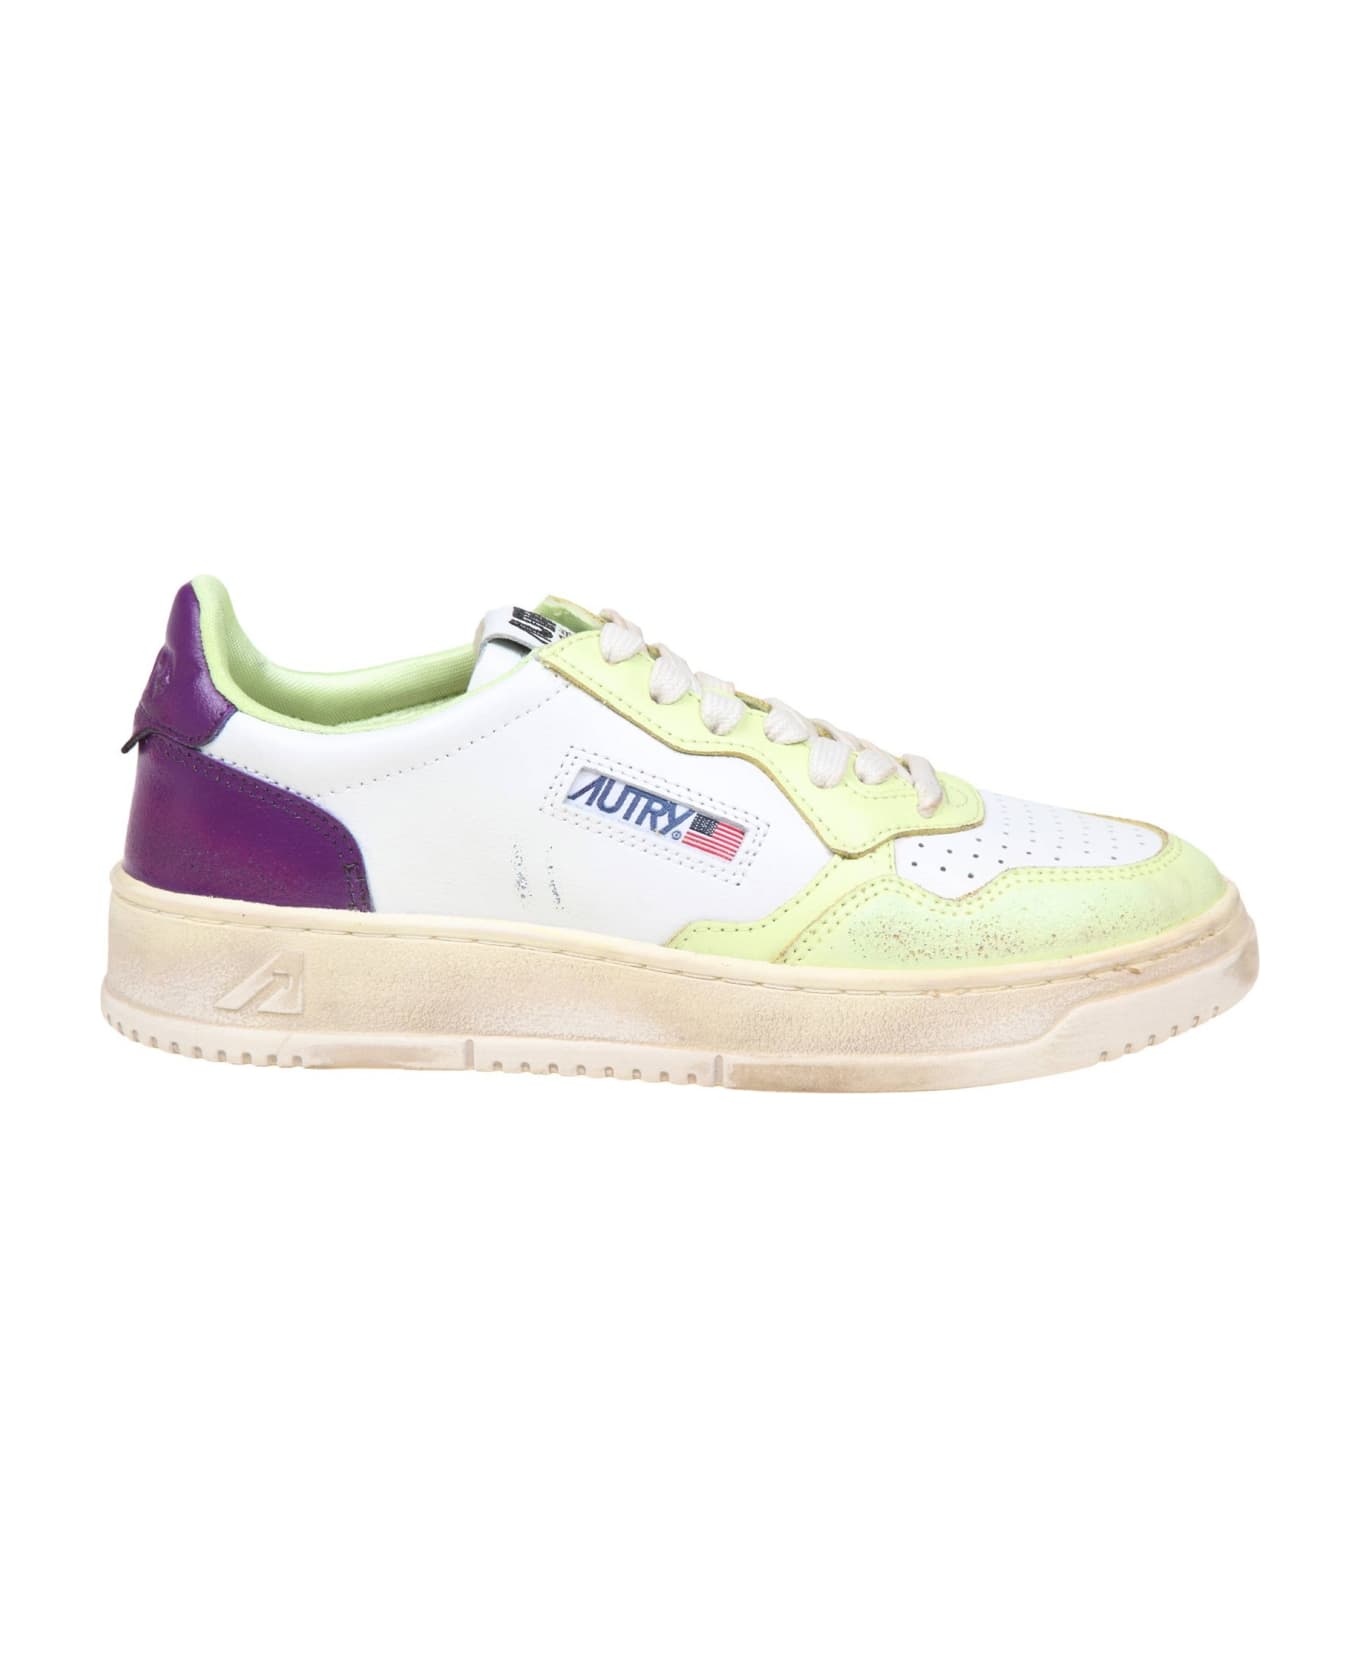 Autry Sneakers In Vintage Leather - Multicolor